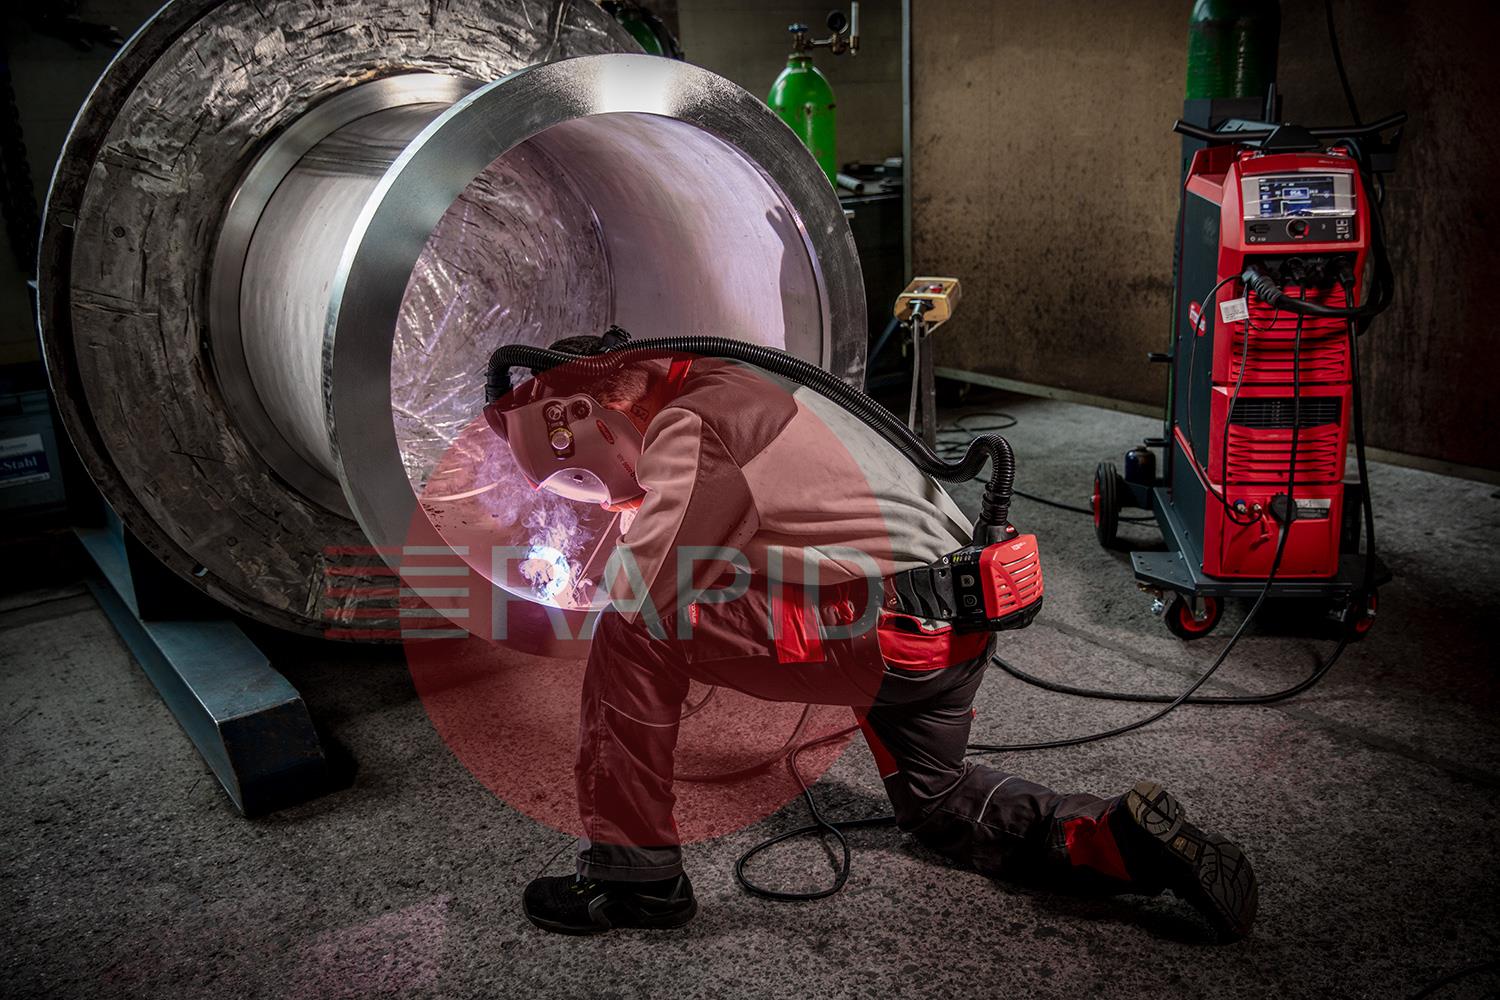 4,075,241PKGW  Fronius - iWave 400i DC Water-Cooled TIG Welder Package, 400v, THP 400i TIG Torch & Earth